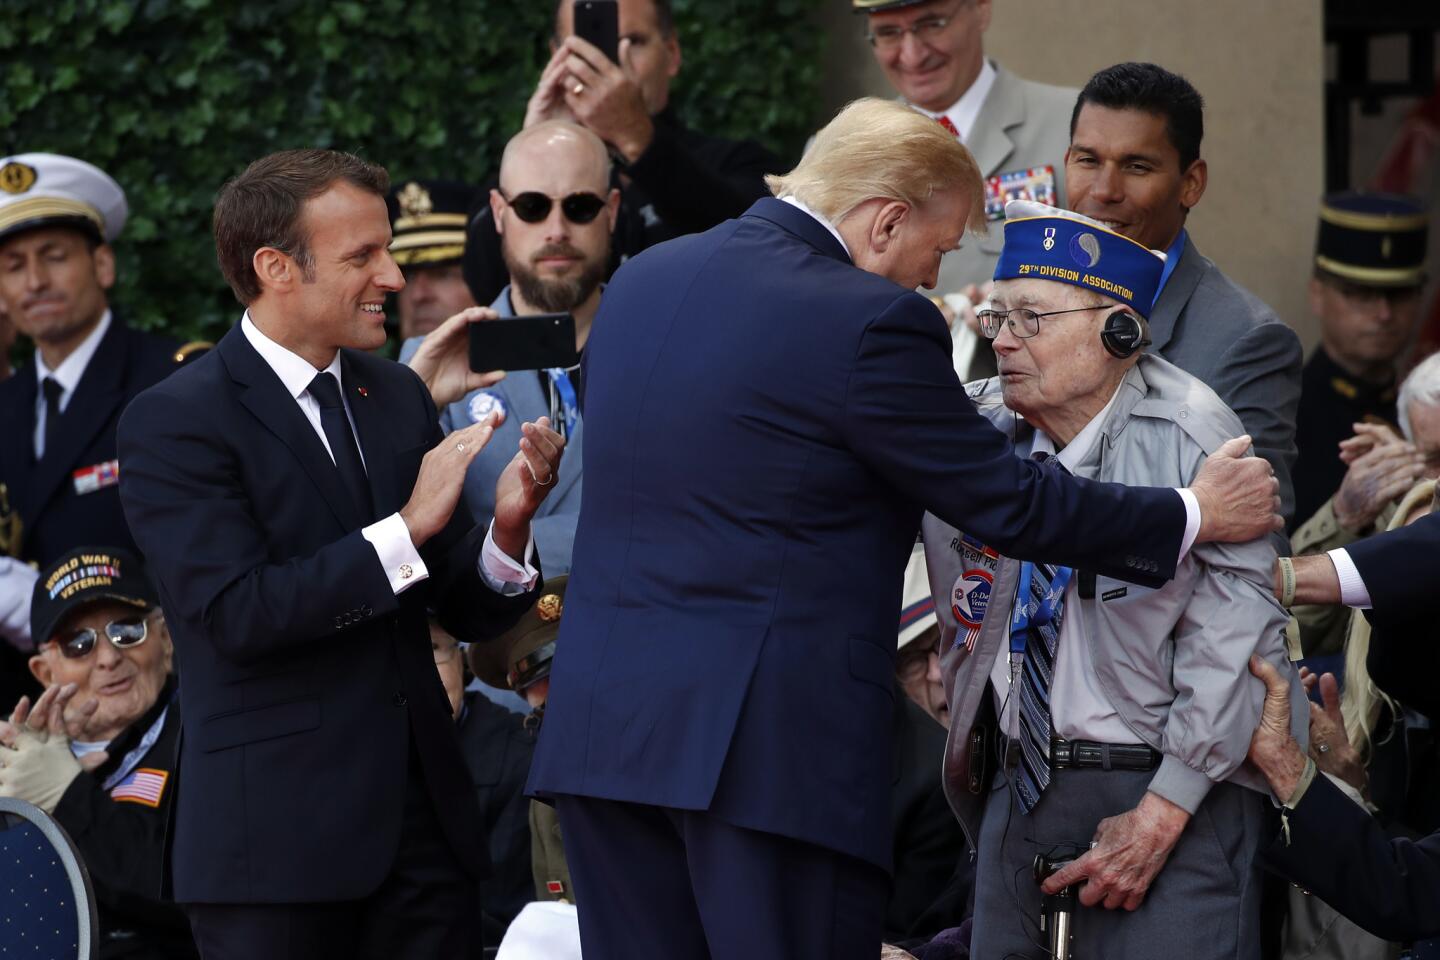 President Trump and French President Emmanuel Macron talk to World War II veterans during a ceremony to commemorate the 75th anniversary of D-day June 6 at the American Normandy cemetery in Colleville-sur-Mer, France.